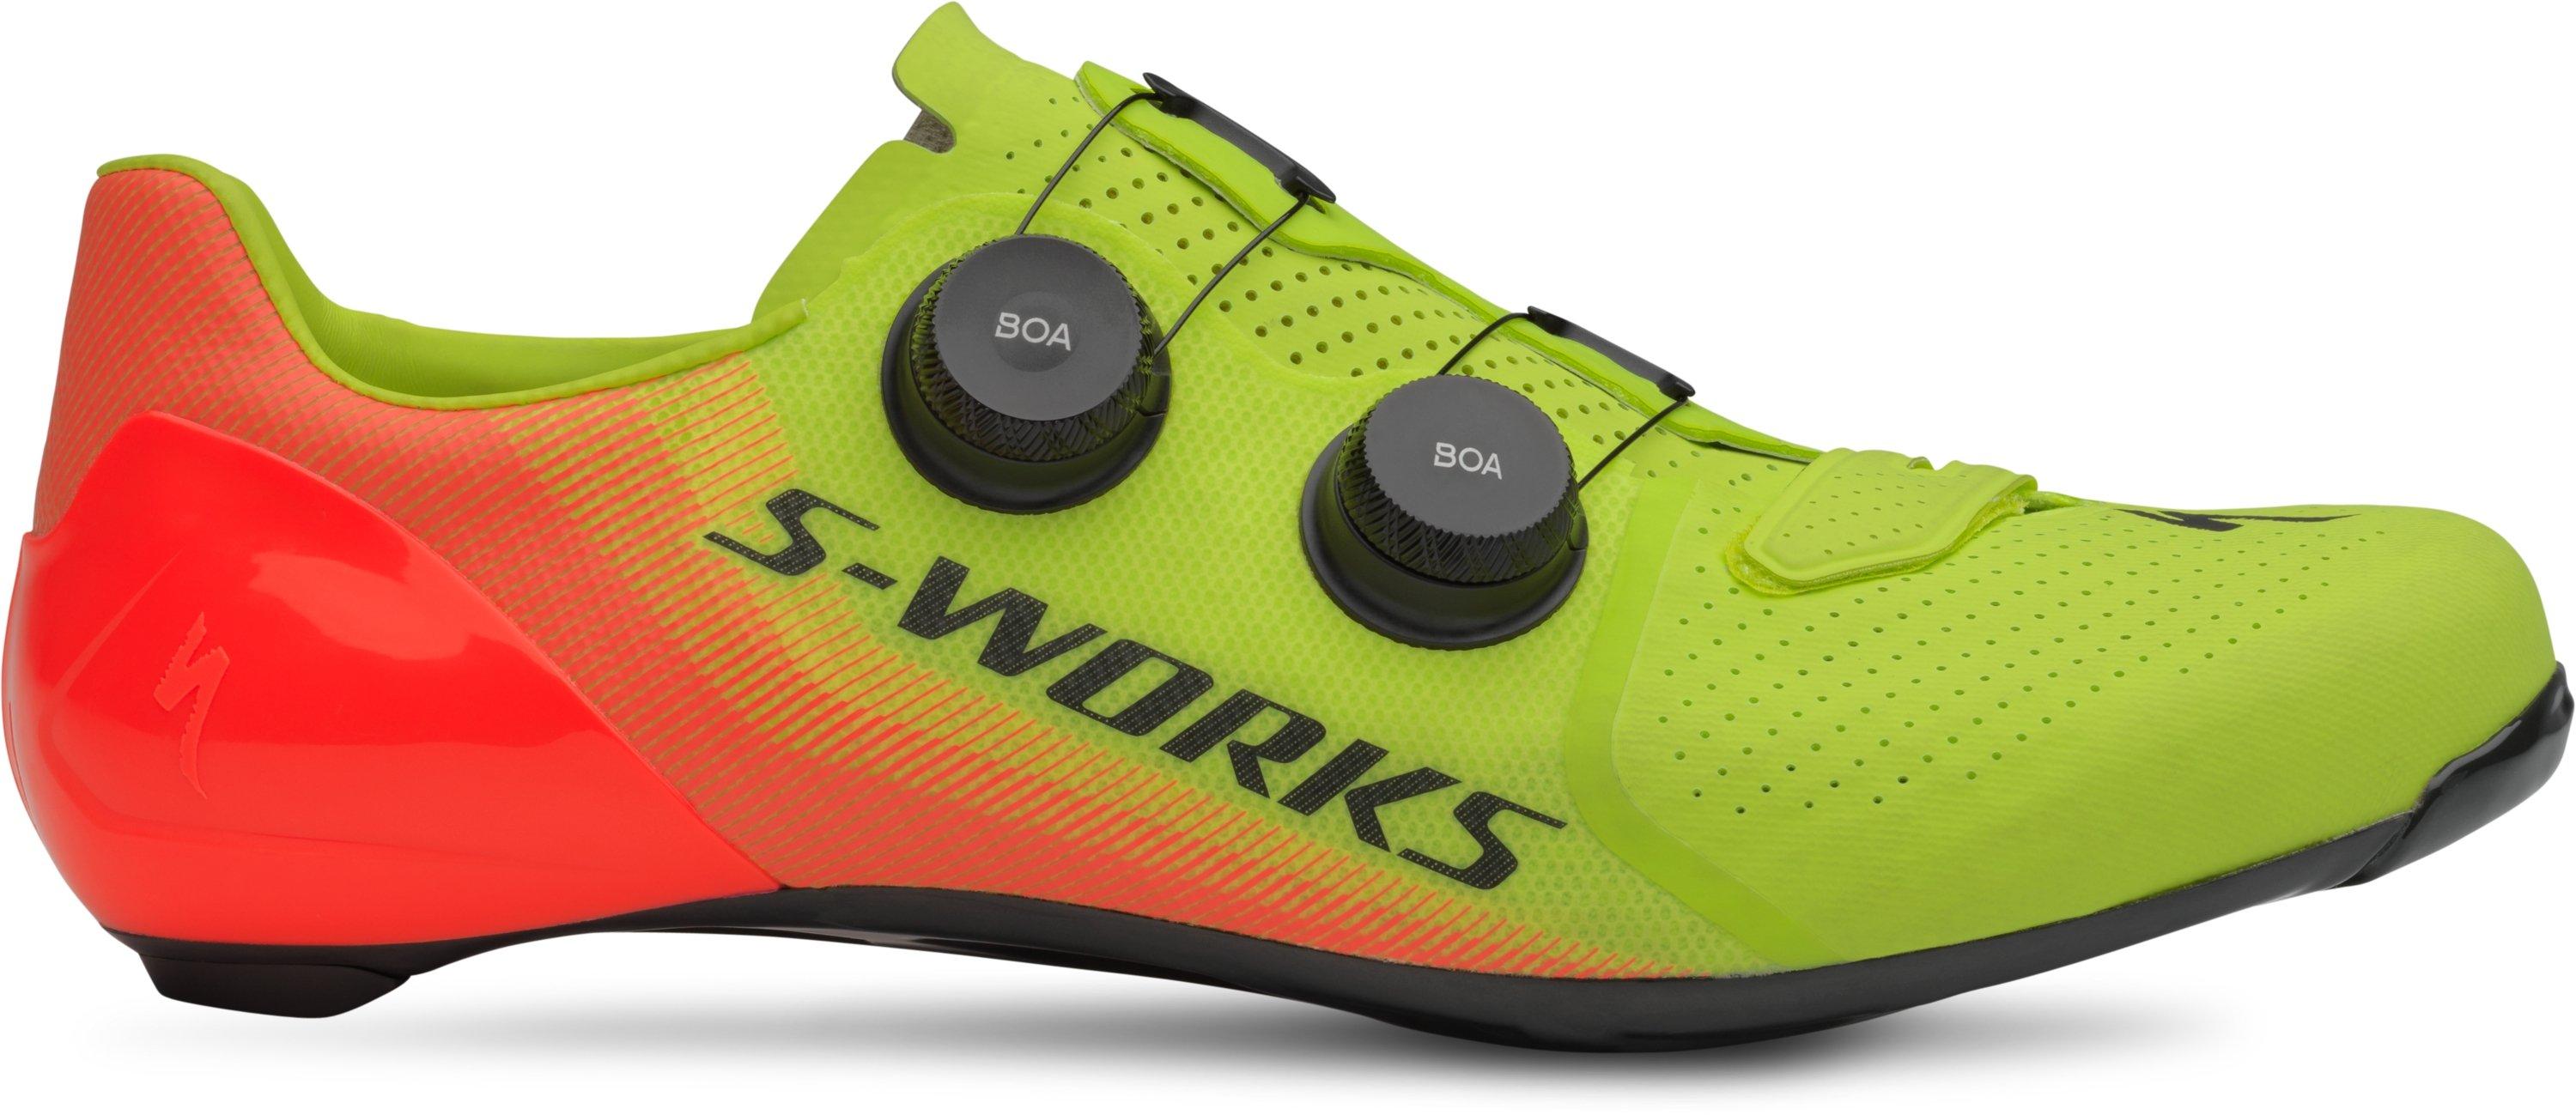 S-Works Road Shoes